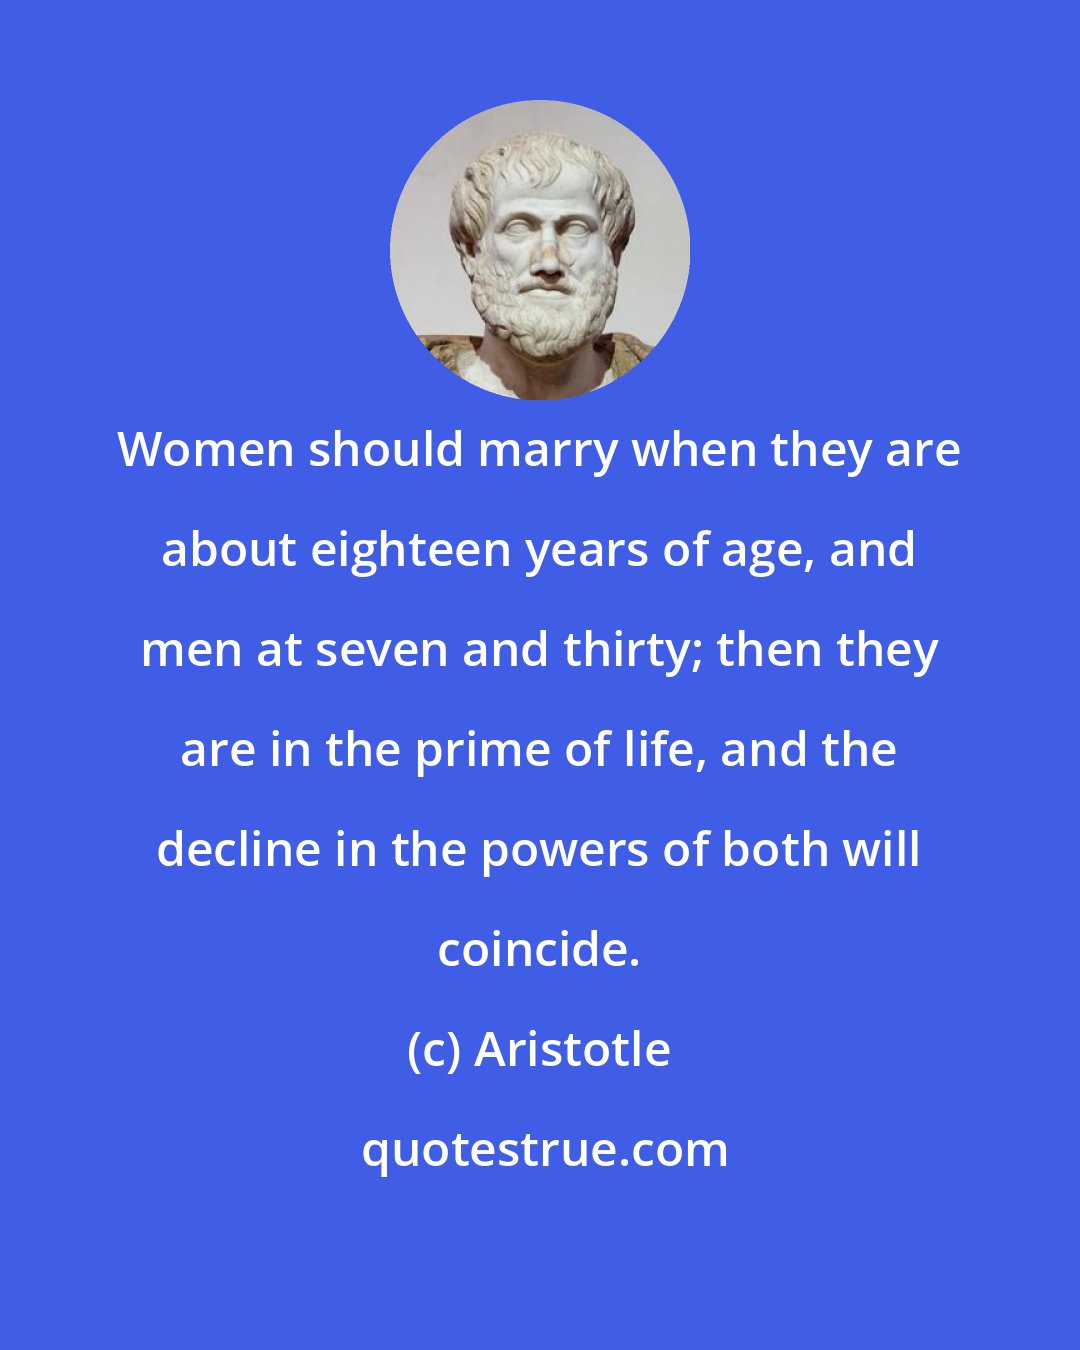 Aristotle: Women should marry when they are about eighteen years of age, and men at seven and thirty; then they are in the prime of life, and the decline in the powers of both will coincide.